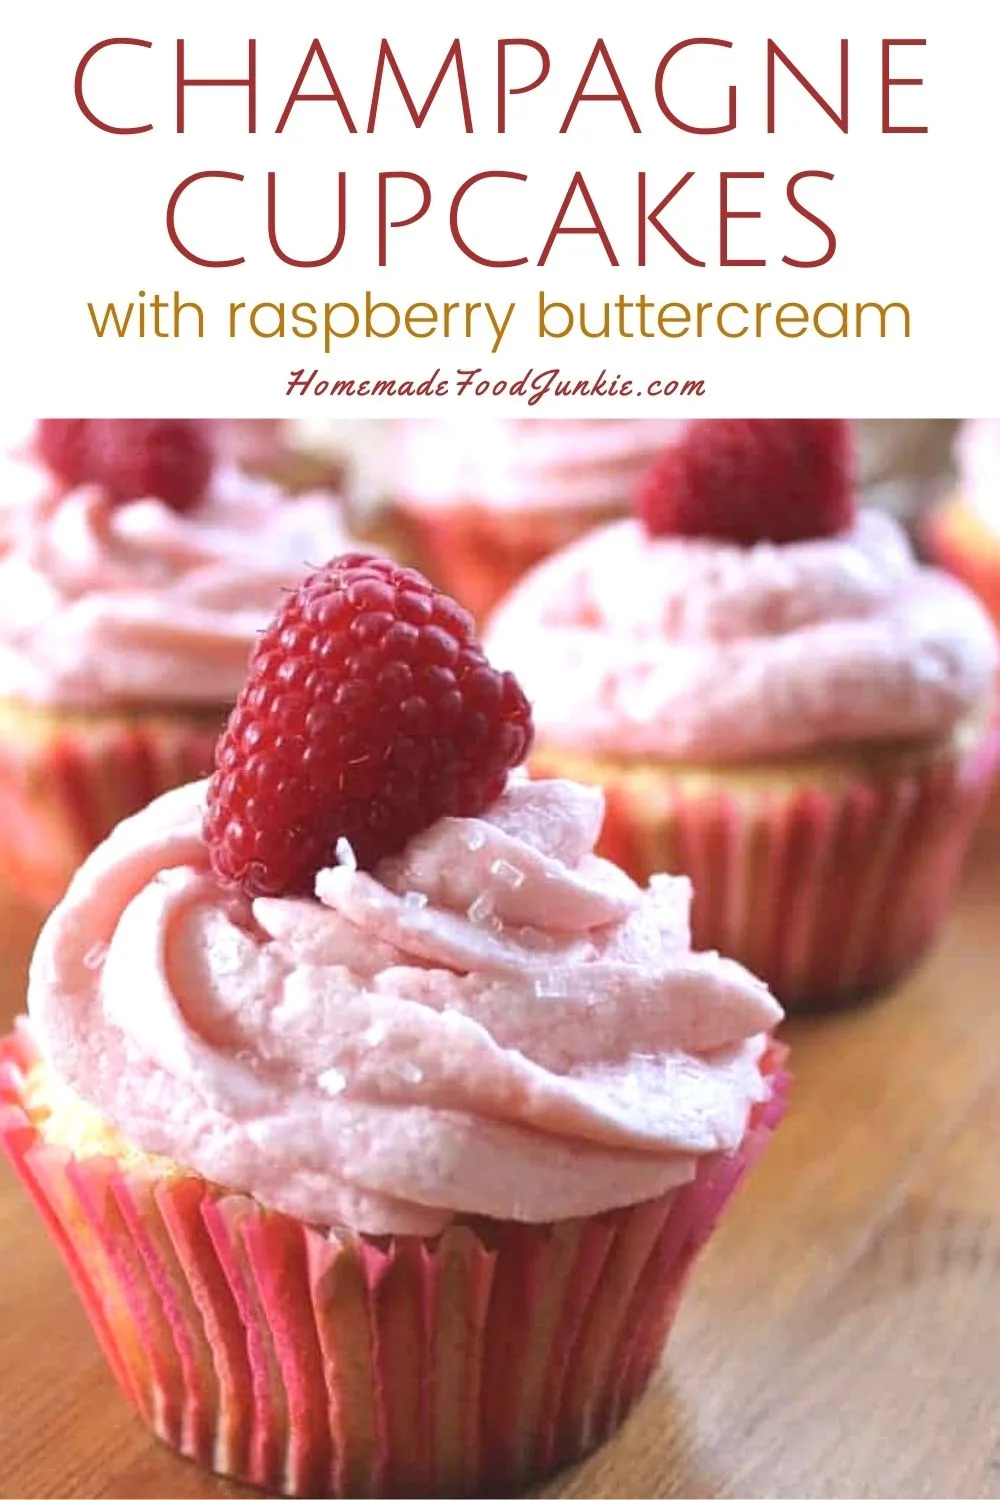 Champagne Cupcakes With Raspberry Buttercream-Pin Image